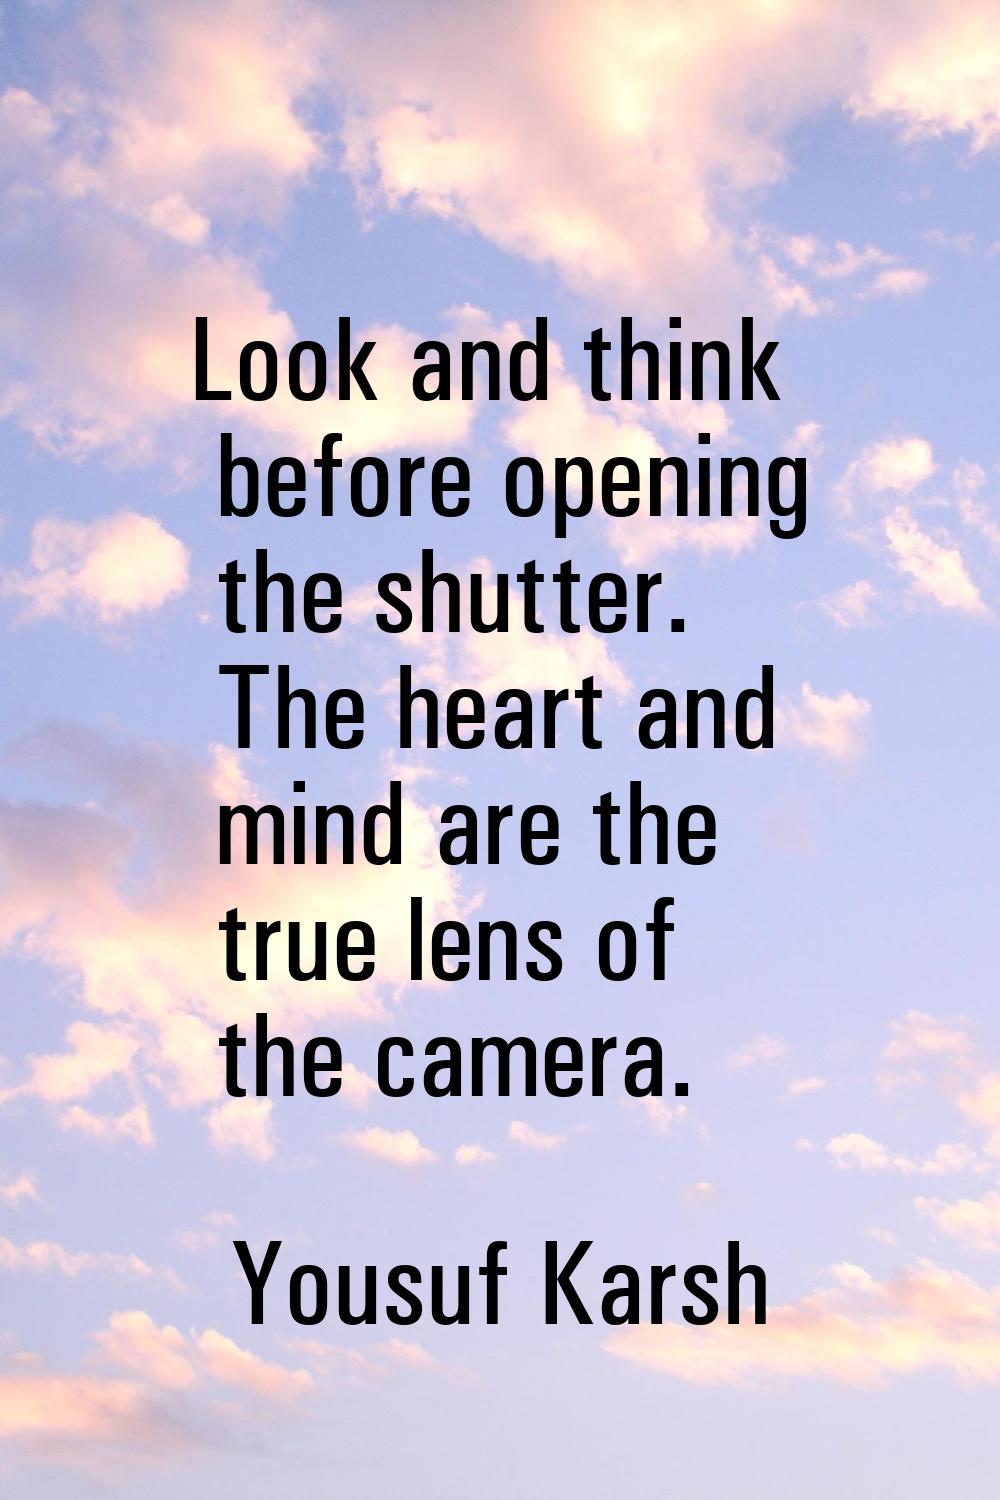 Look and think before opening the shutter. The heart and mind are the true lens of the camera.